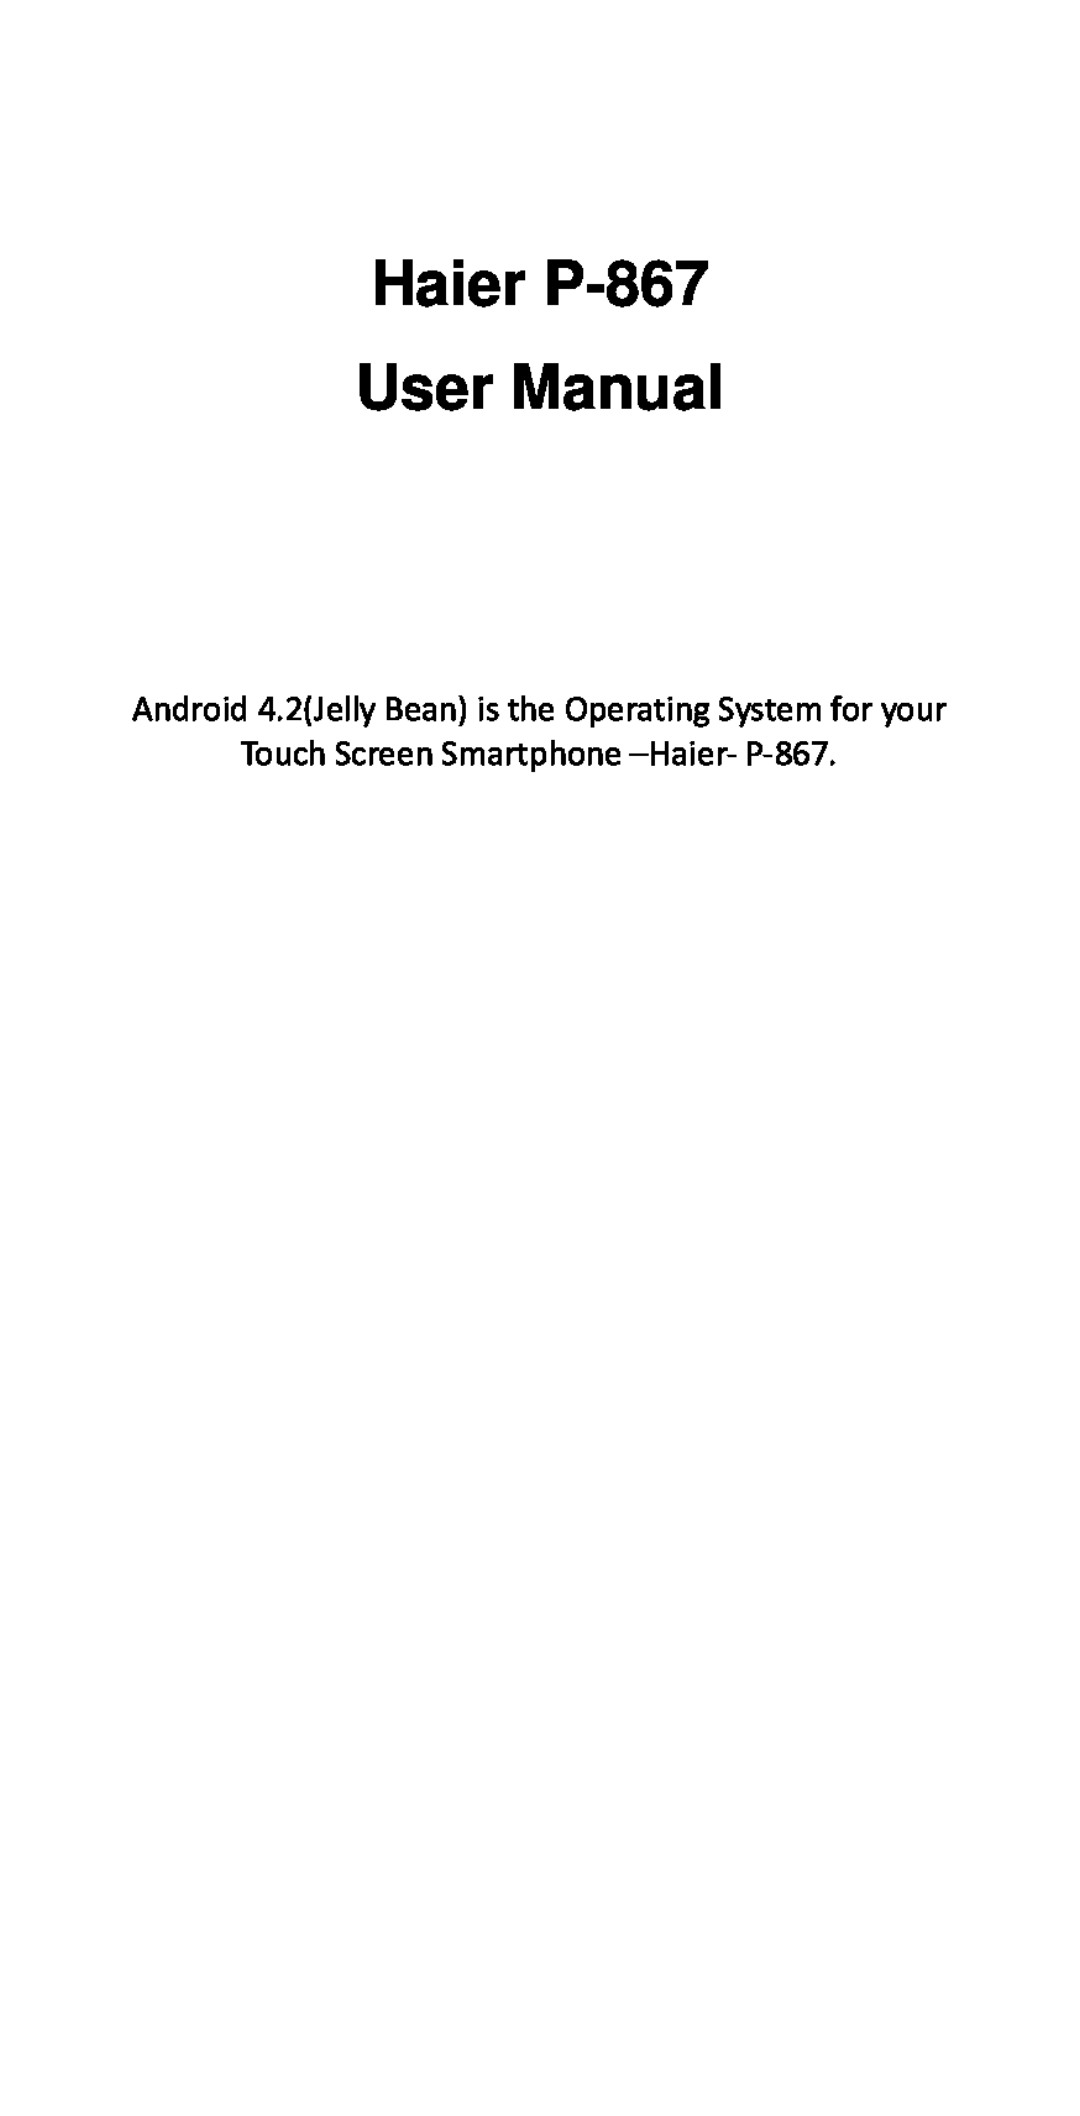 Haier user manual Android 4.2Jelly Bean is the Operating System for your, Touch Screen Smartphone -Haier- P-867 